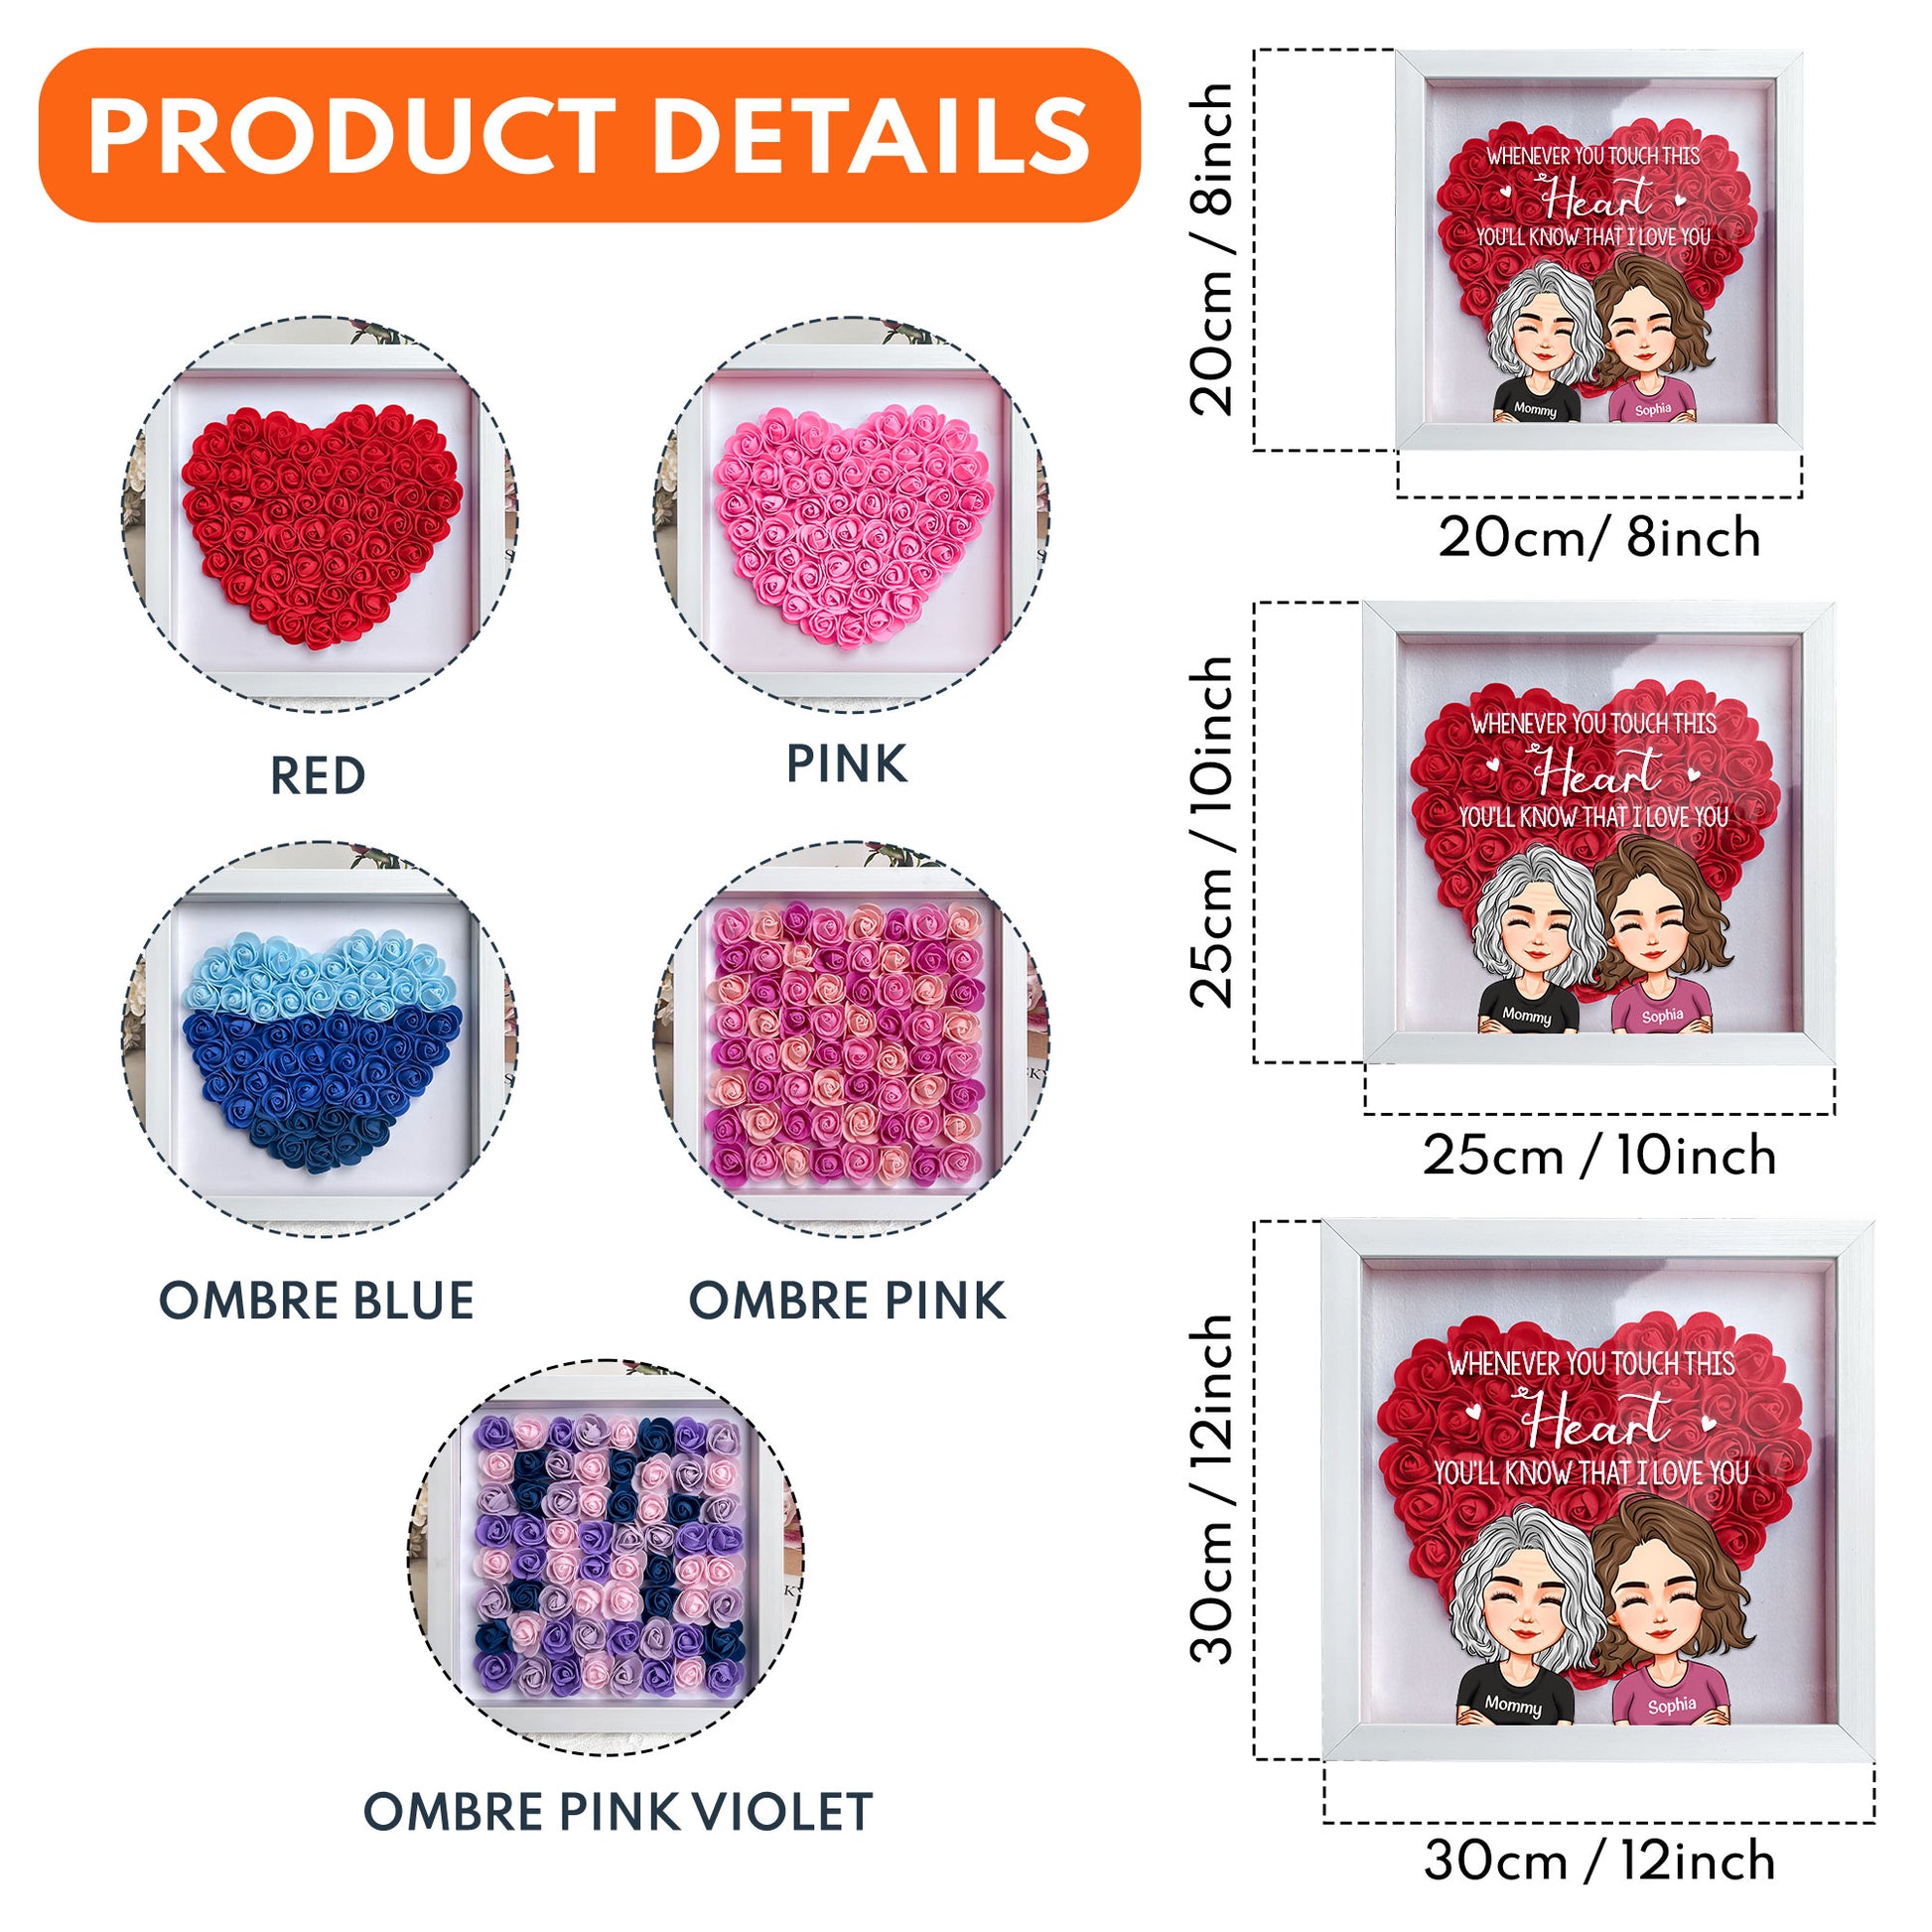 Whenever You Touch This Heart - Personalized Flower Shadow Box